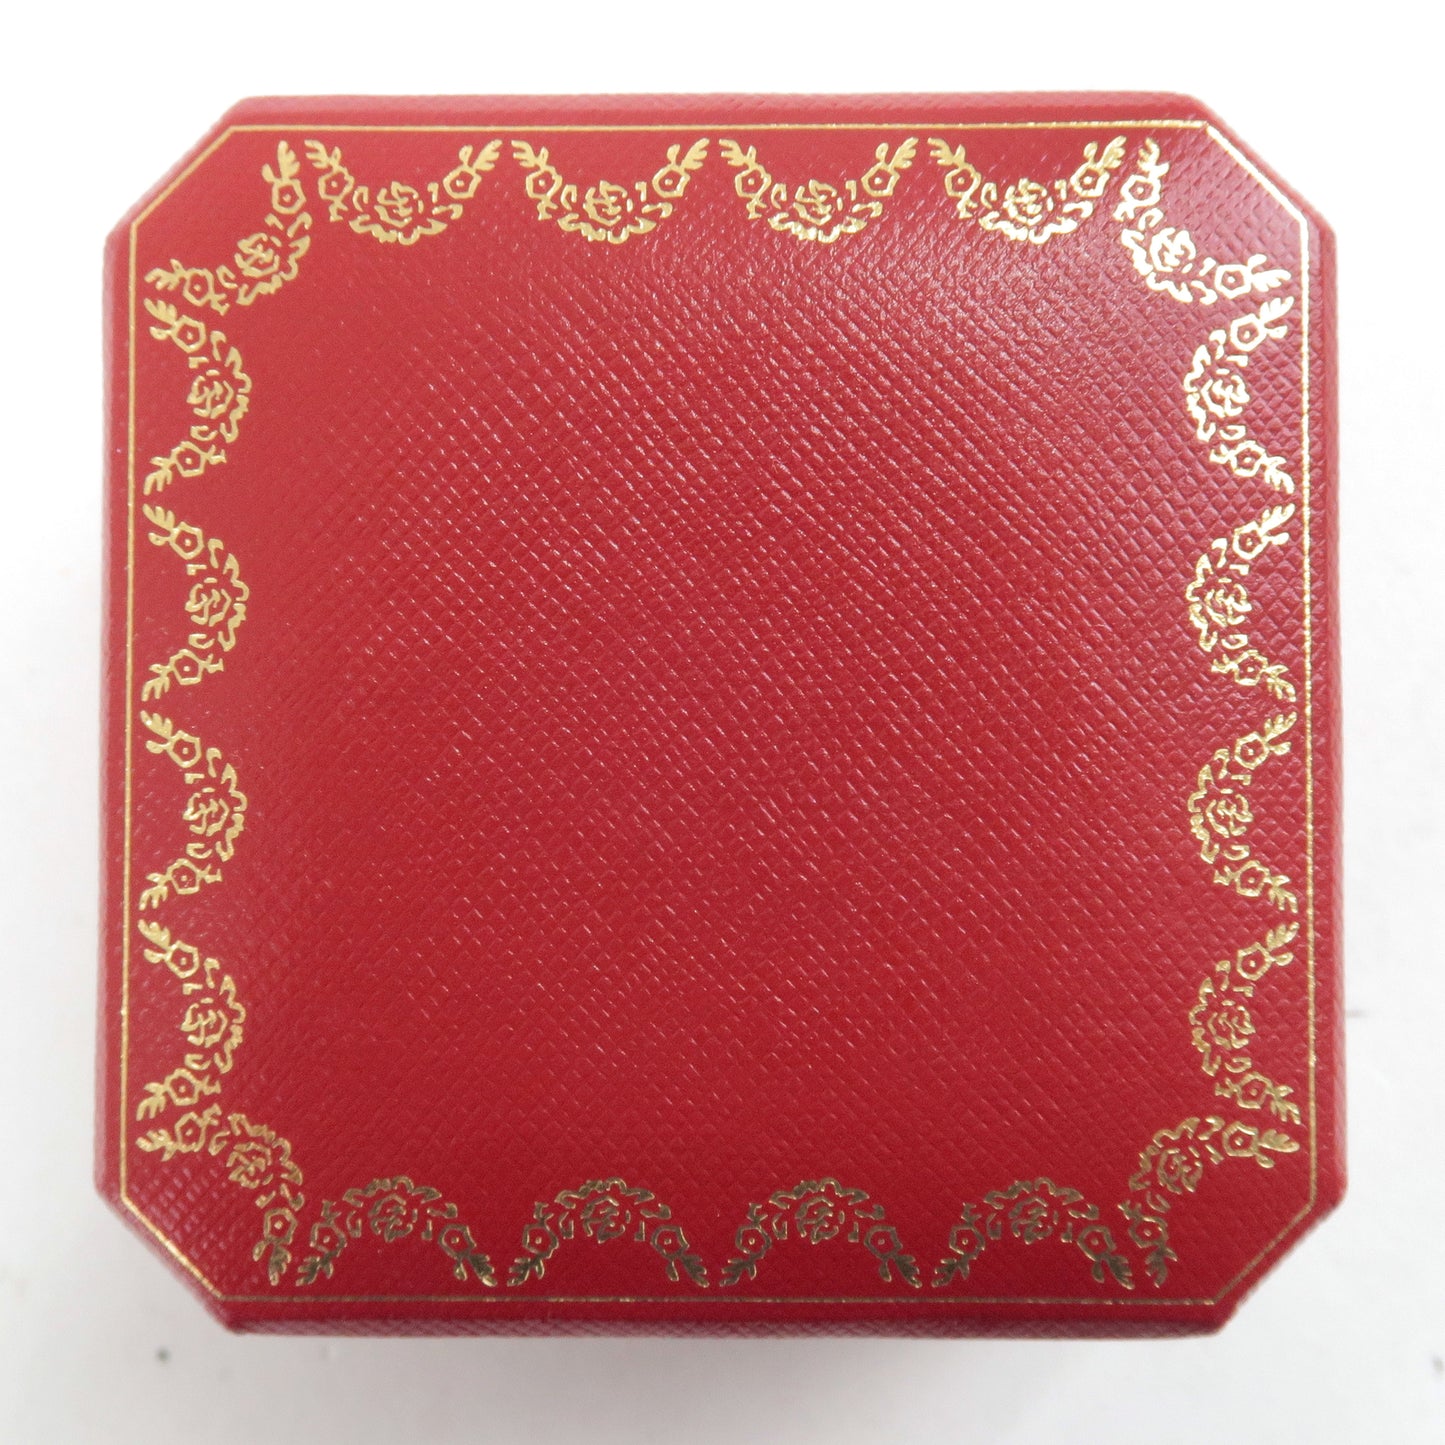 Cartier Set of 2 Ring Display Box Jewelry Box For Ring Red